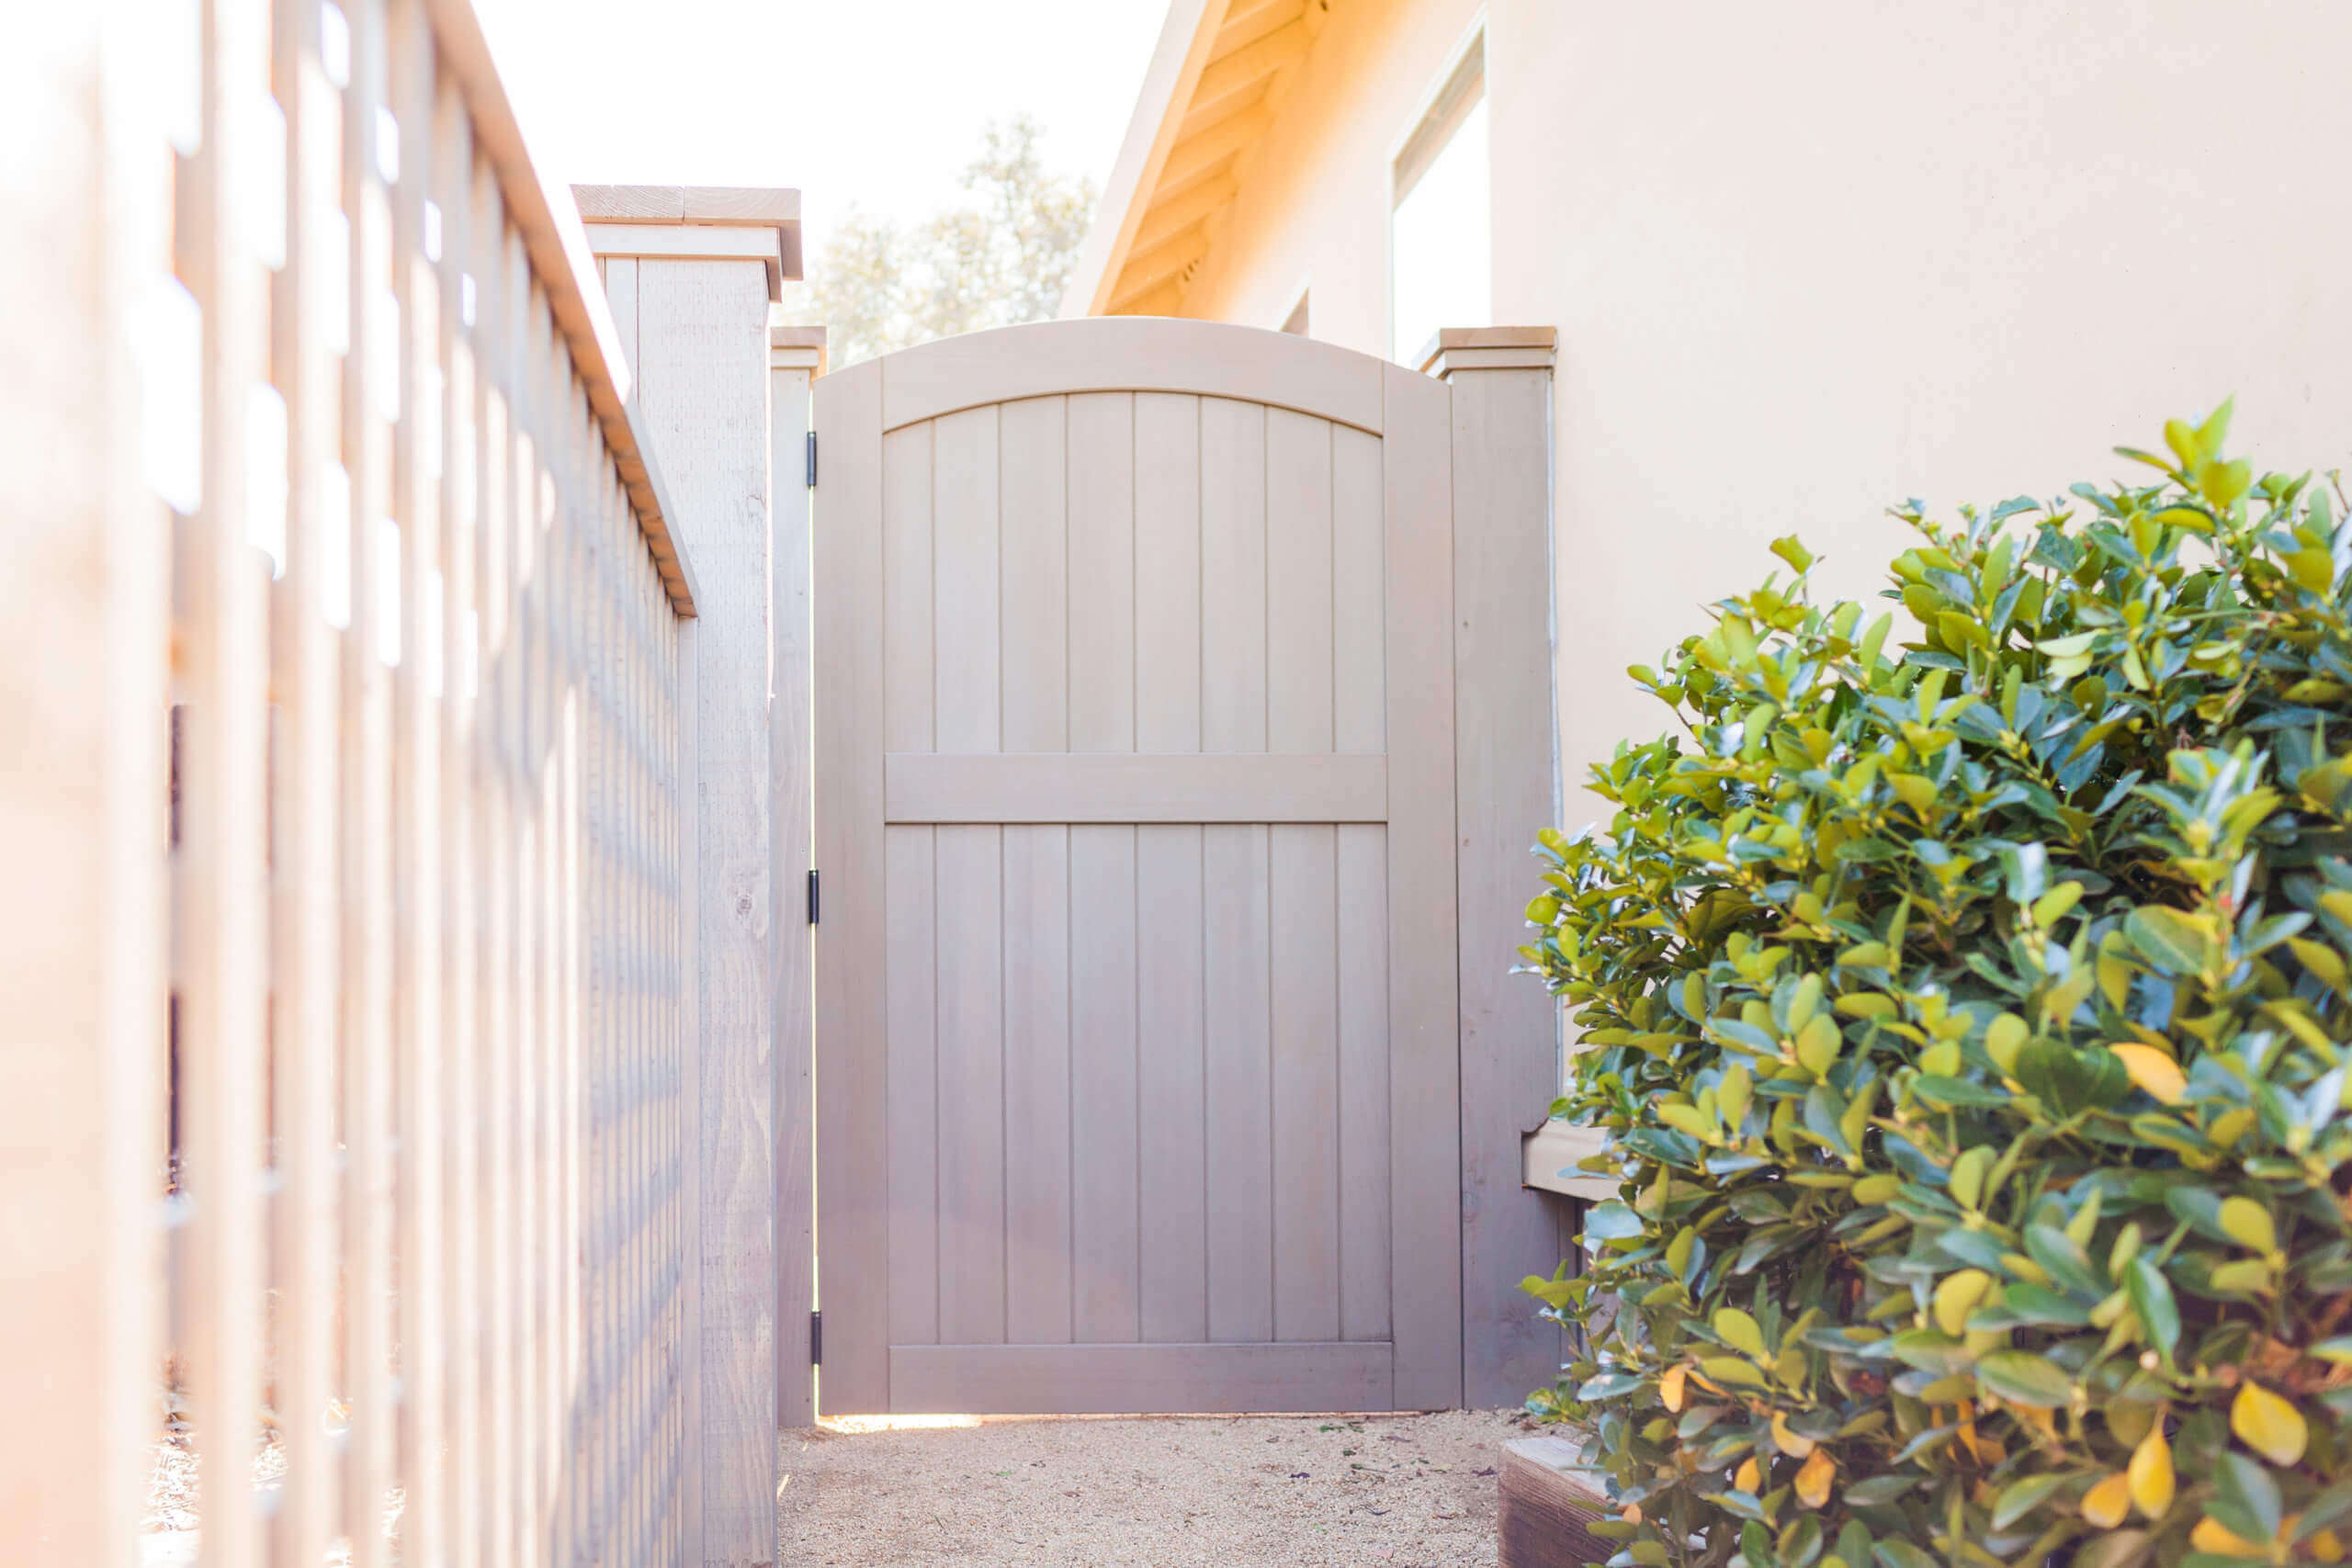 Make Over Your Yard with a Stunning New Gate